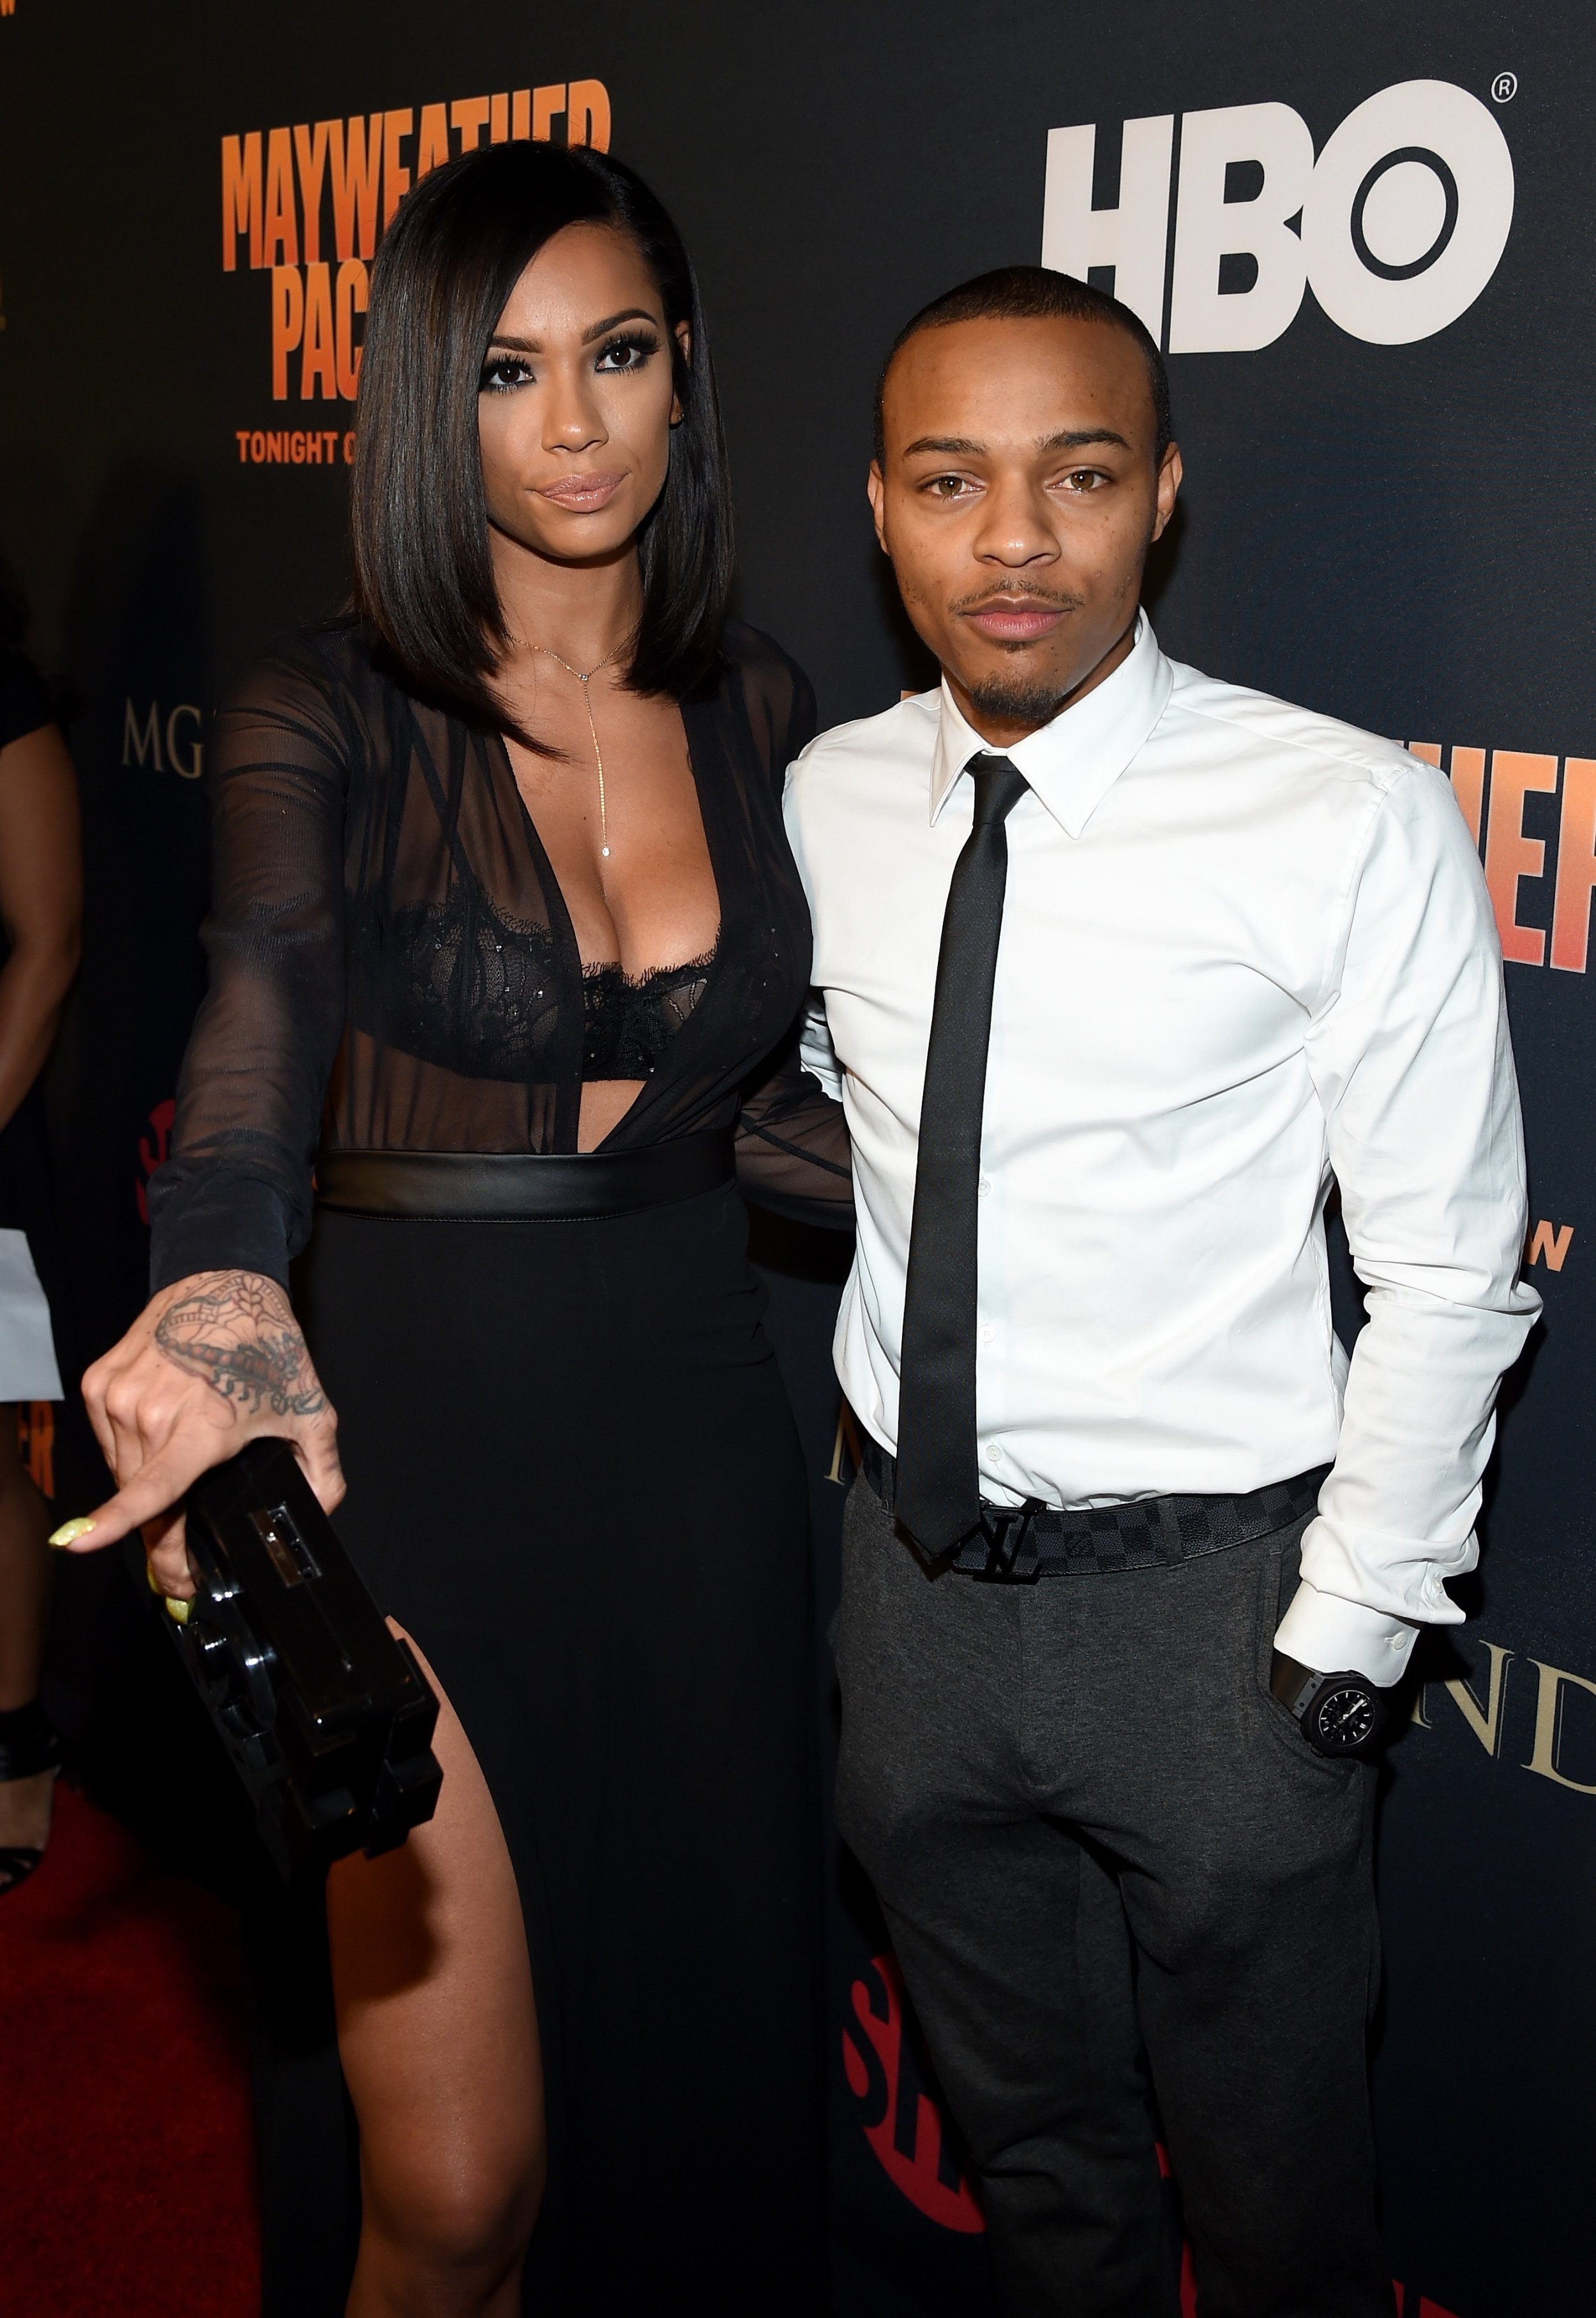 deacon george recommends erica mena naked pictures pic